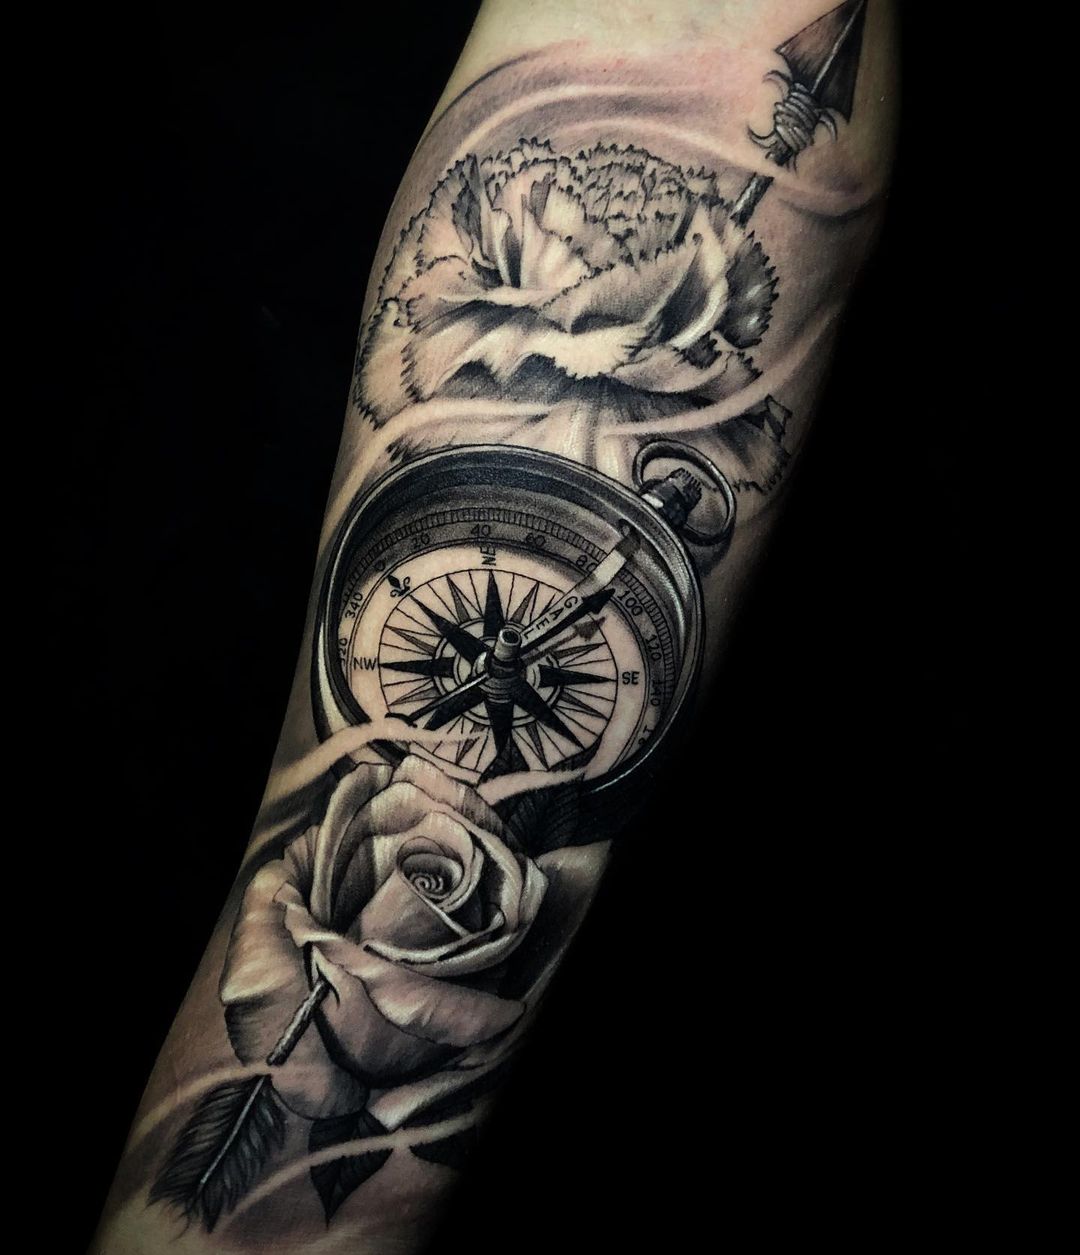 World map compass tattoo on the right inner forearm.